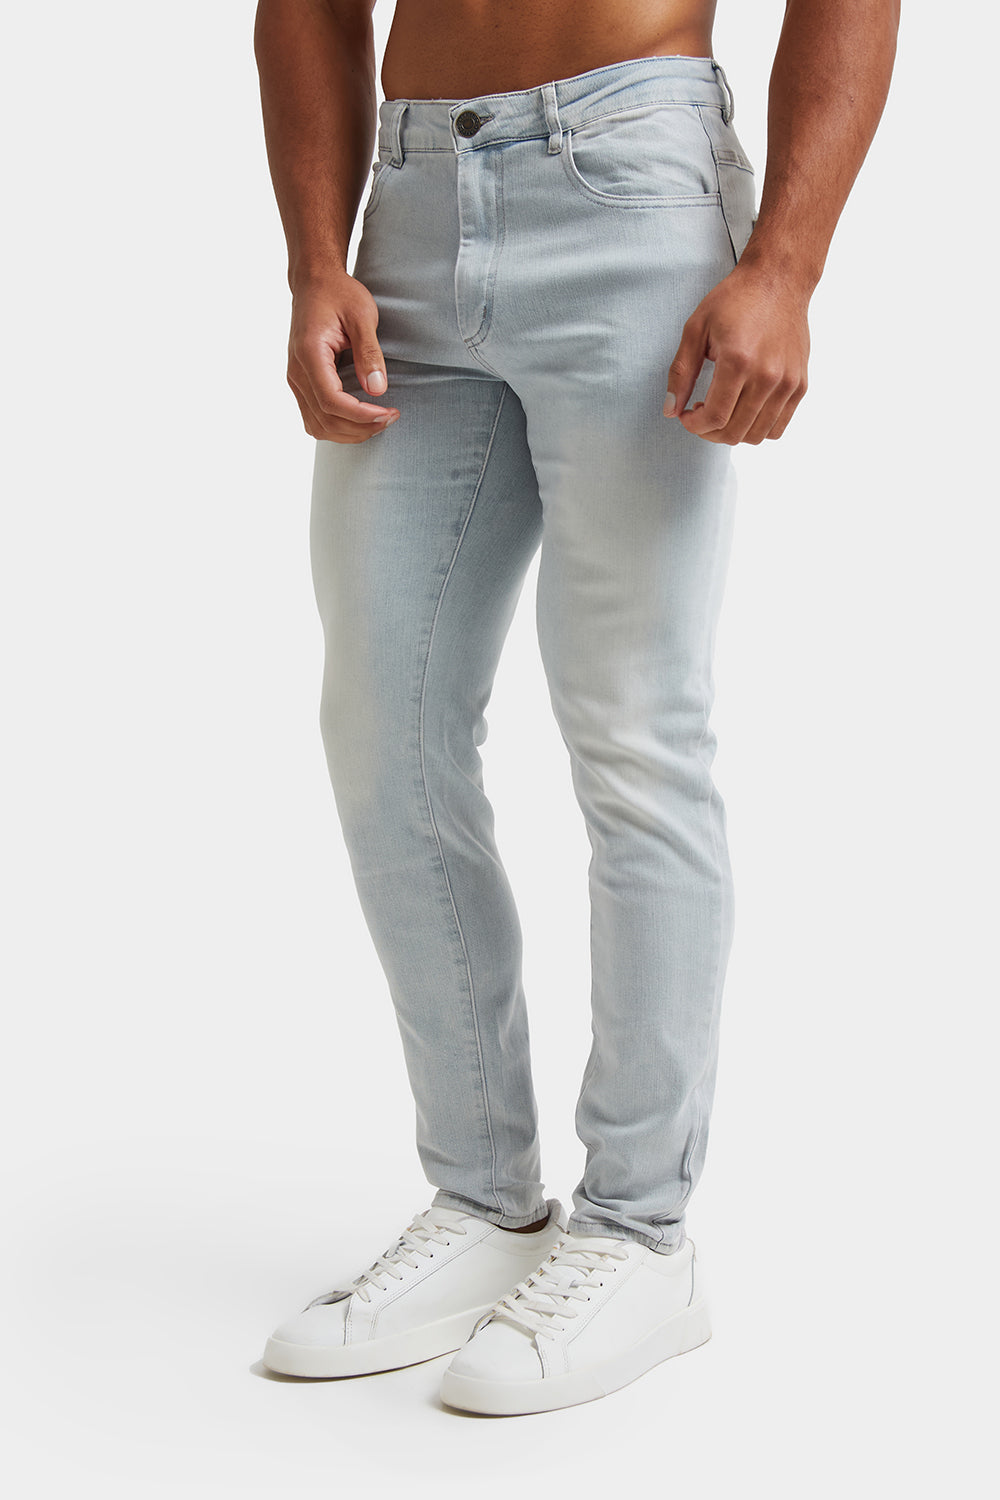 Relaxed Taper Jeans in Vintage Canvas Wash